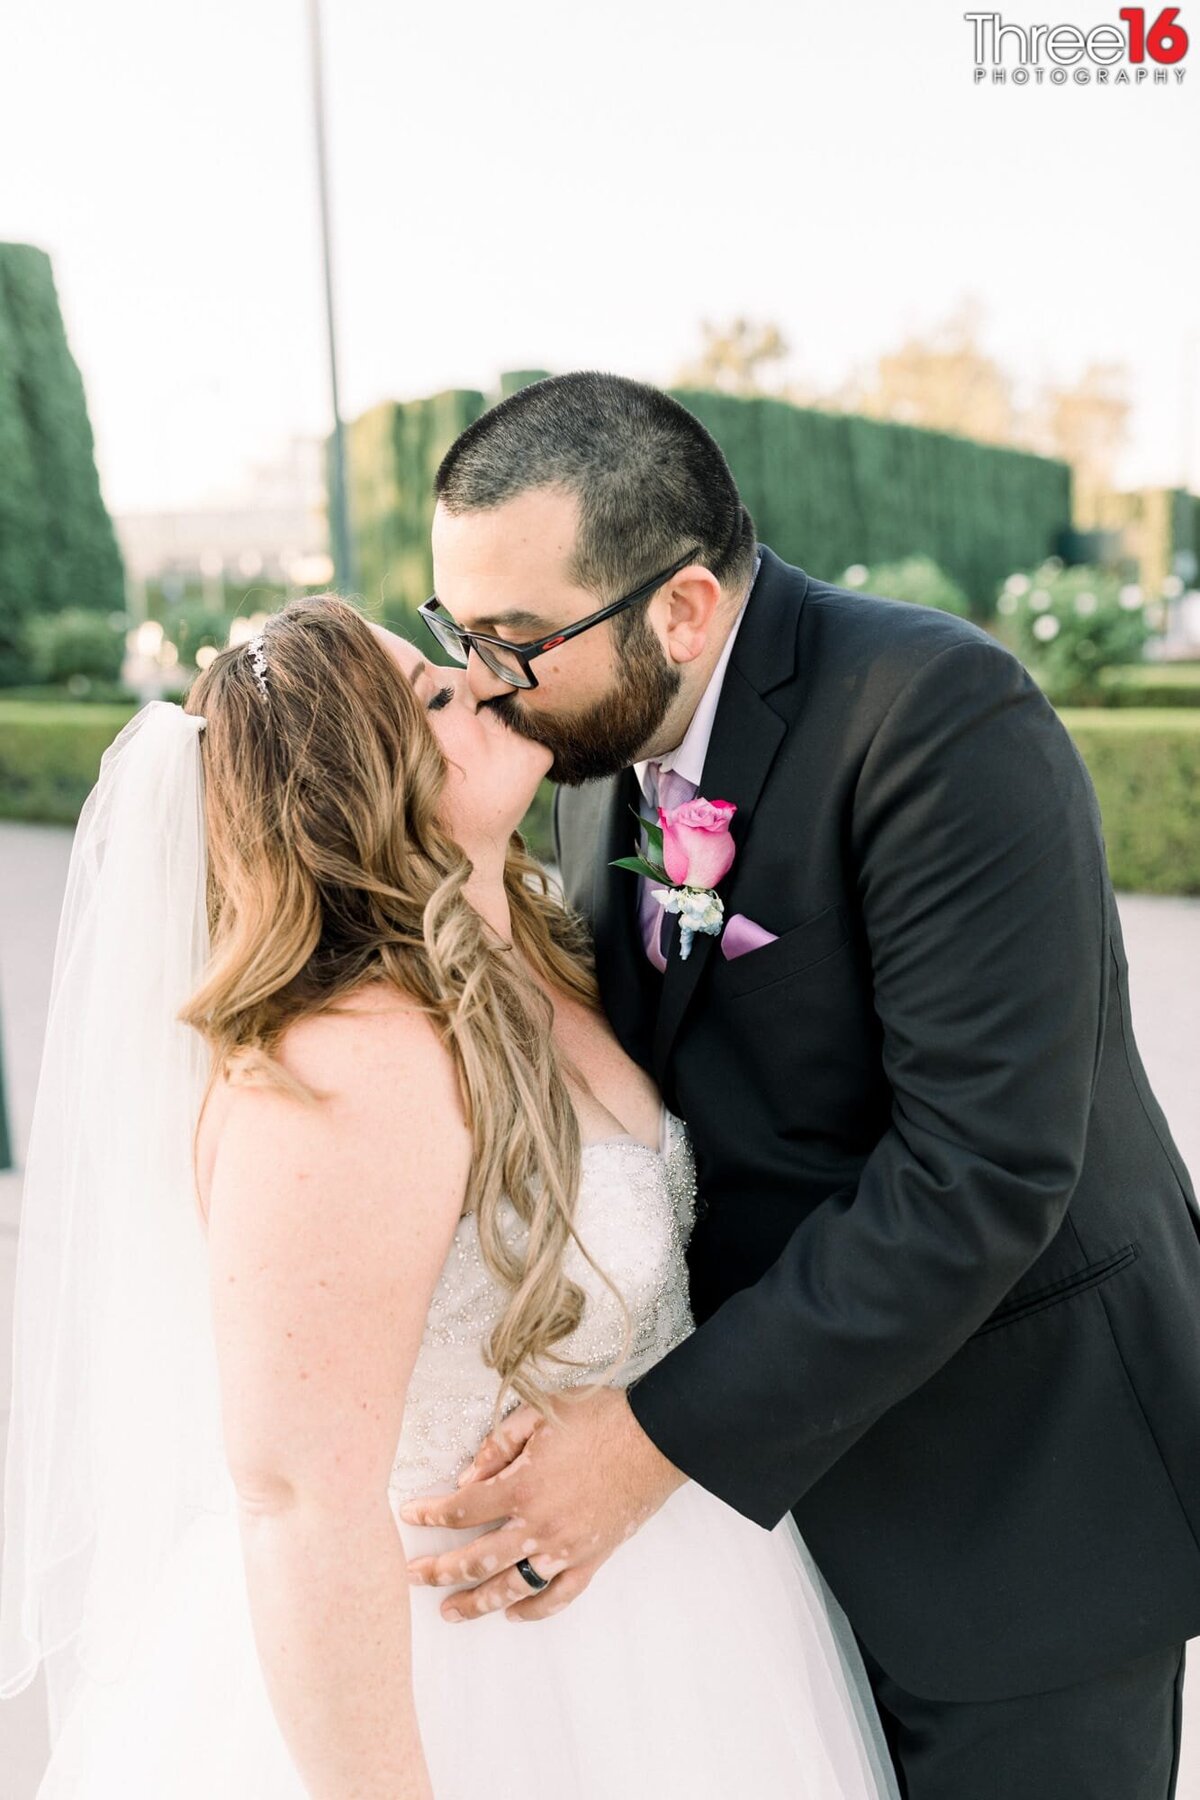 Bride and Groom engage in a romantic kiss after the wedding